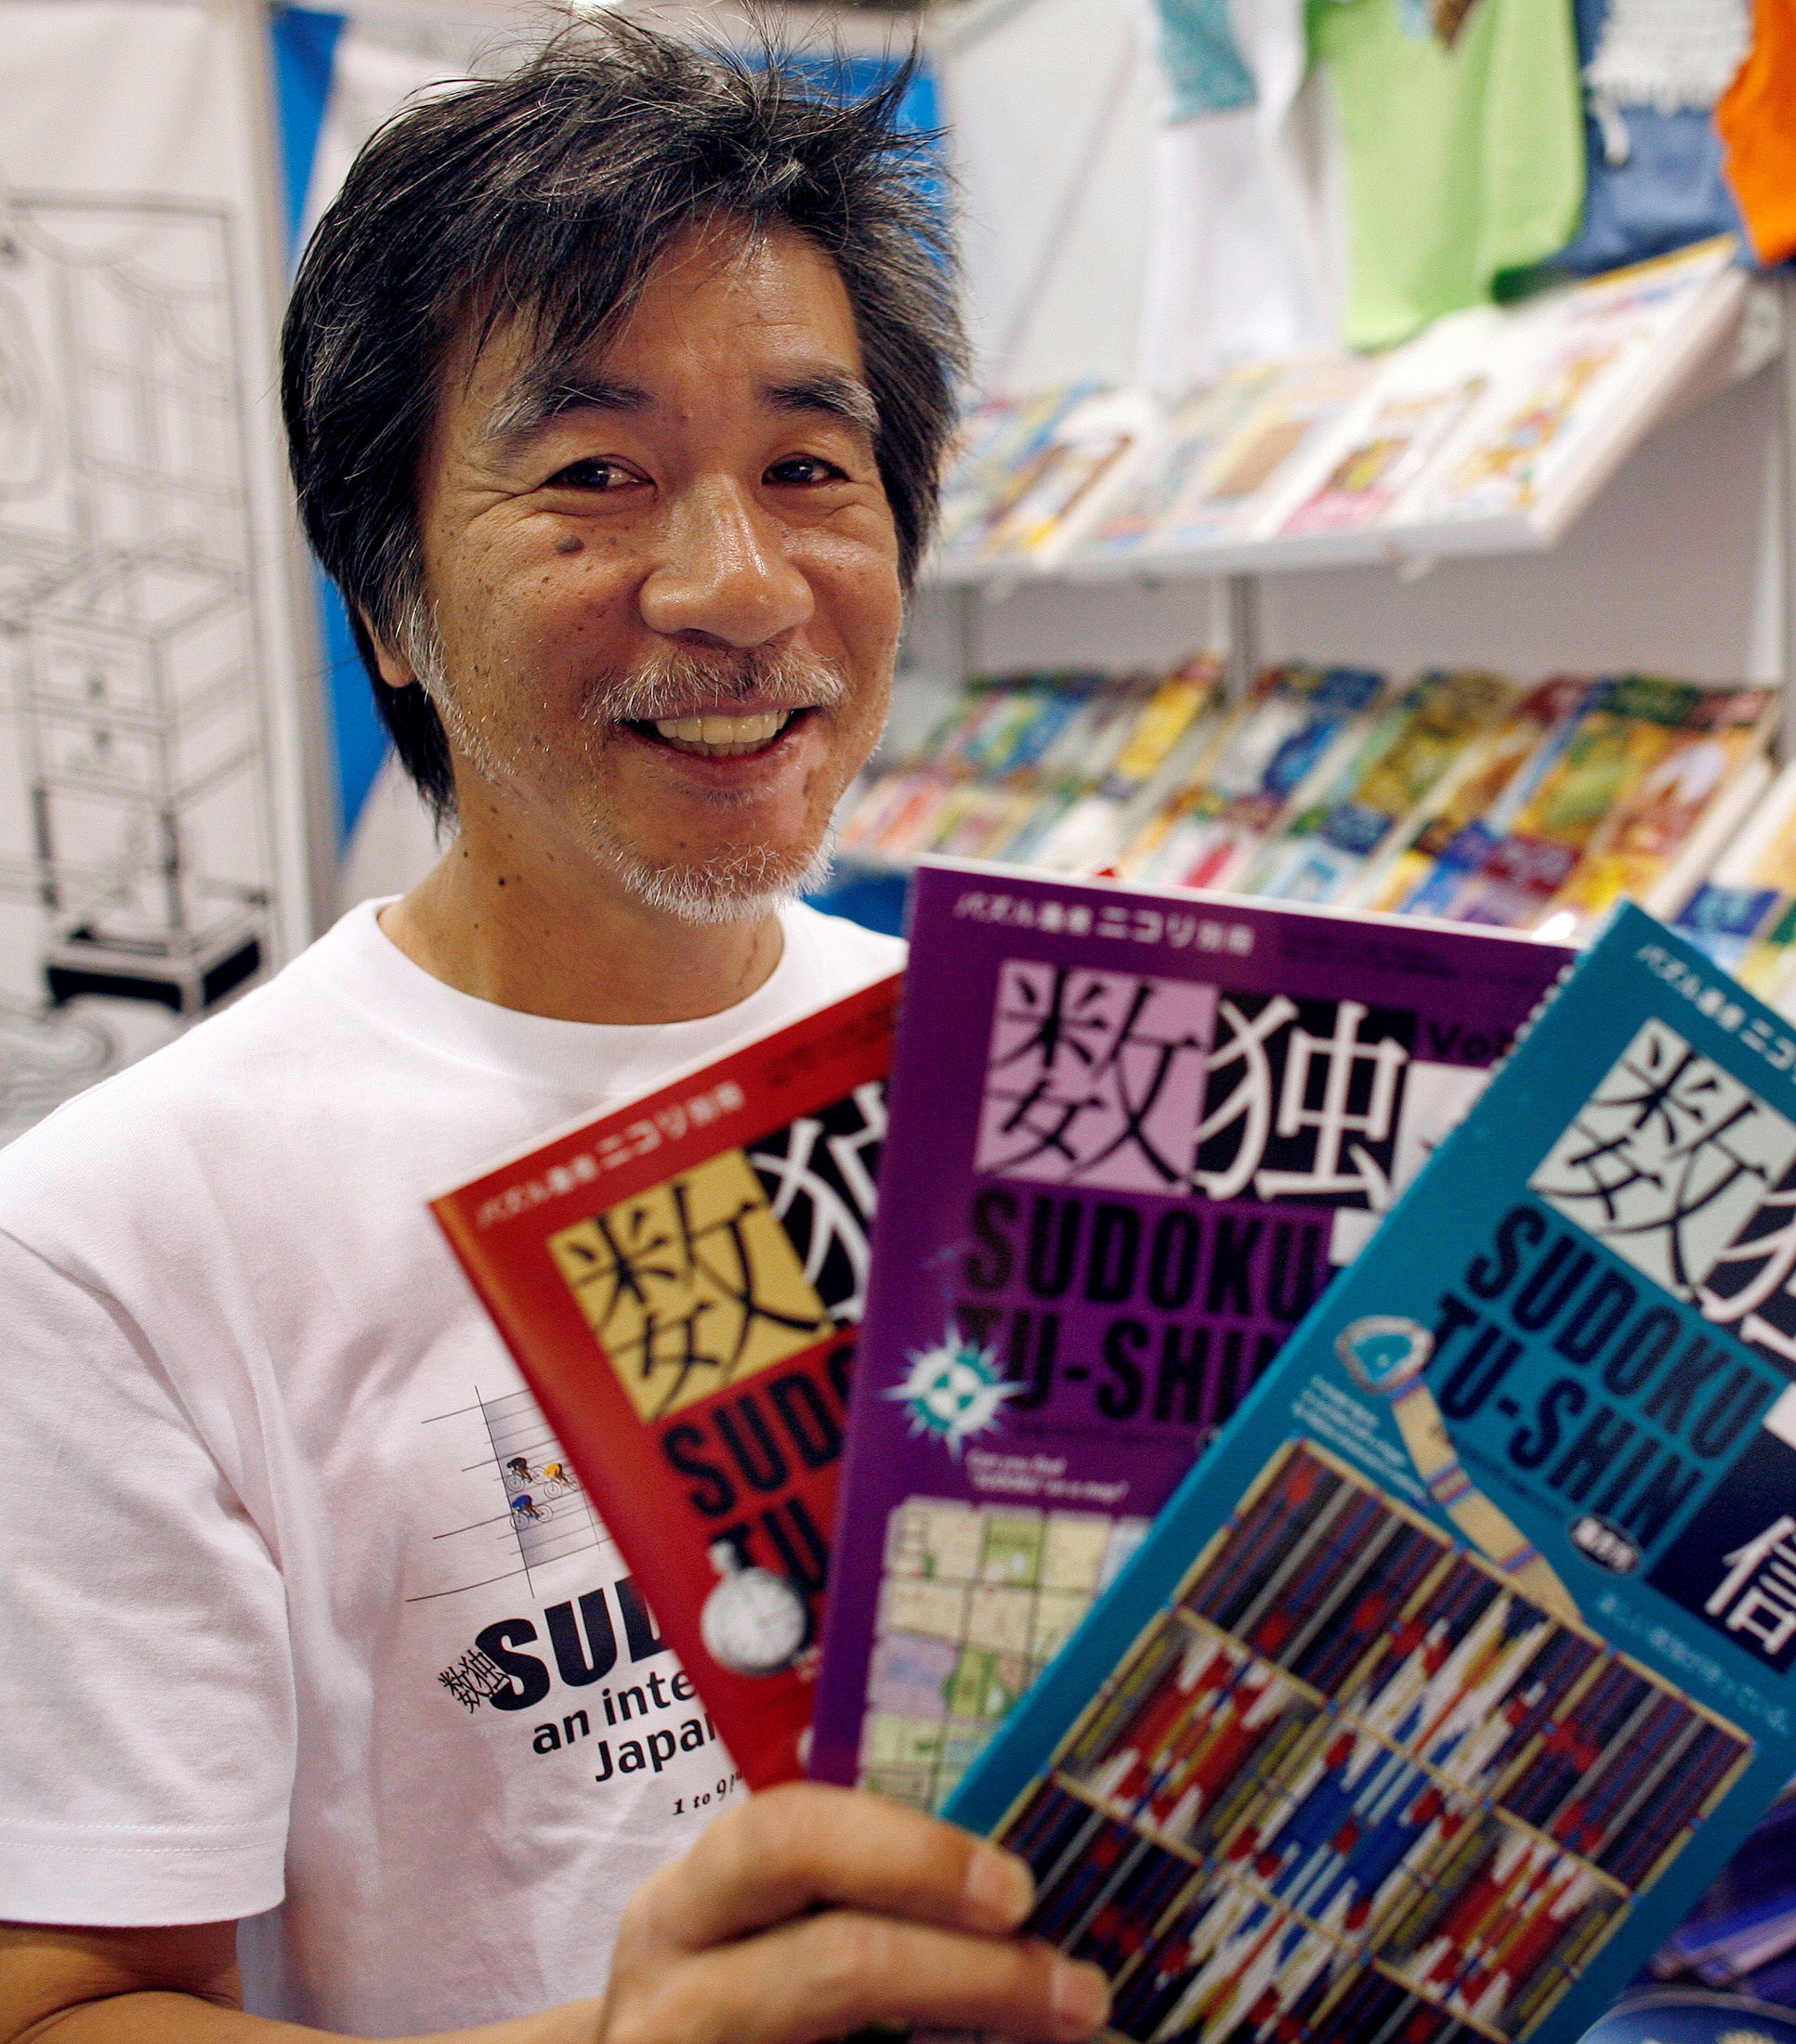 'Father of Sudoku' Maki Kaji holds copies of the latest sudoku puzzles at the Book Expo, in New York